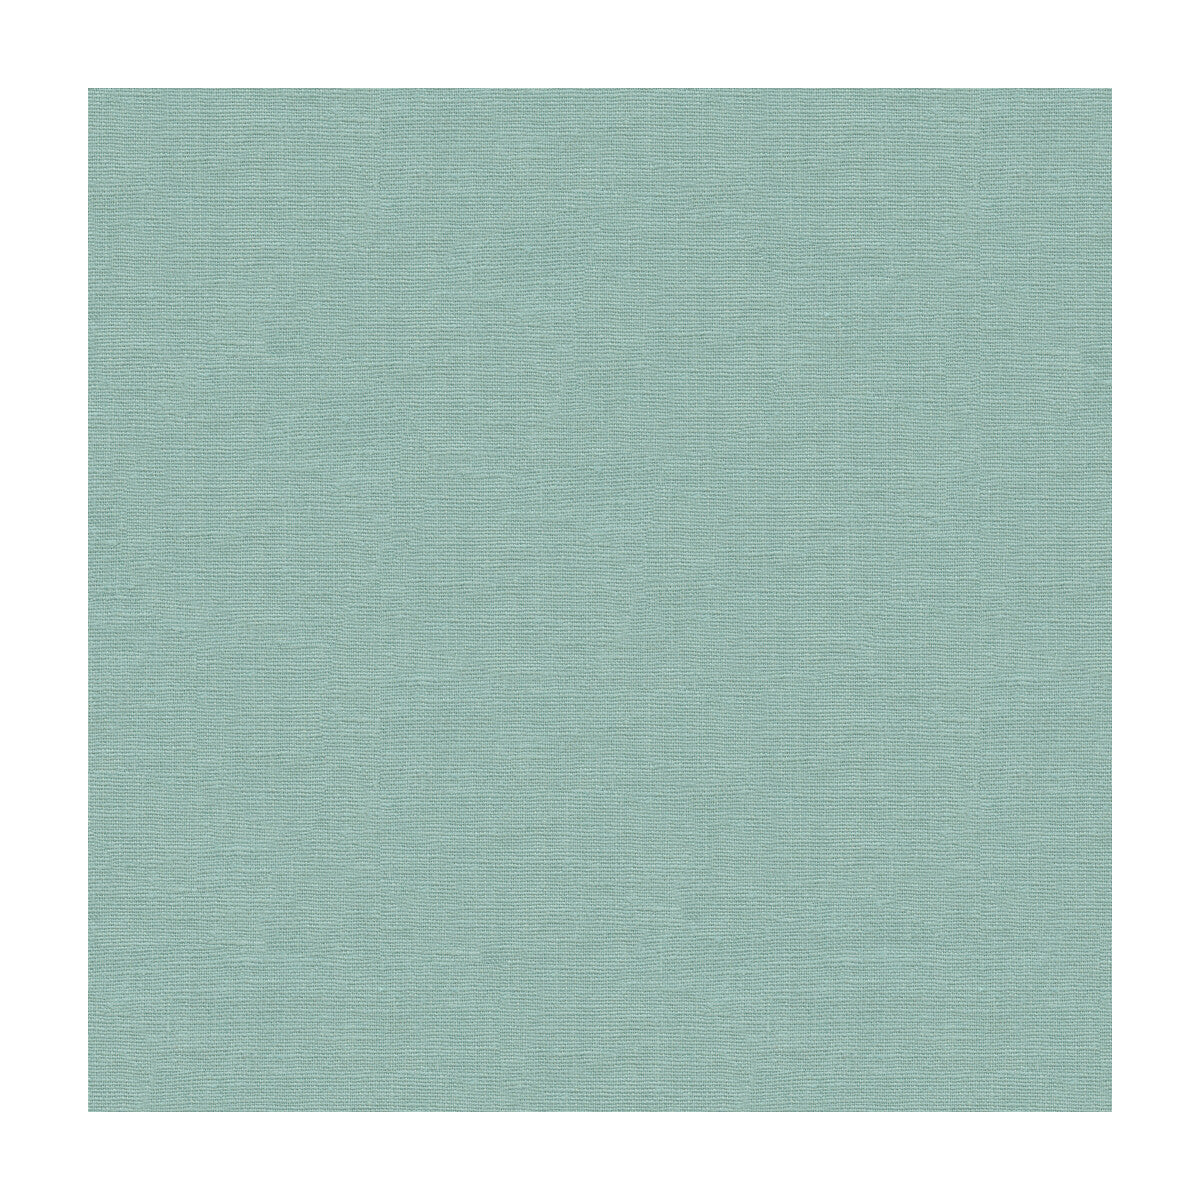 Dublin Linen fabric in spa color - pattern 2012175.15.0 - by Lee Jofa in the Colour Complements II collection